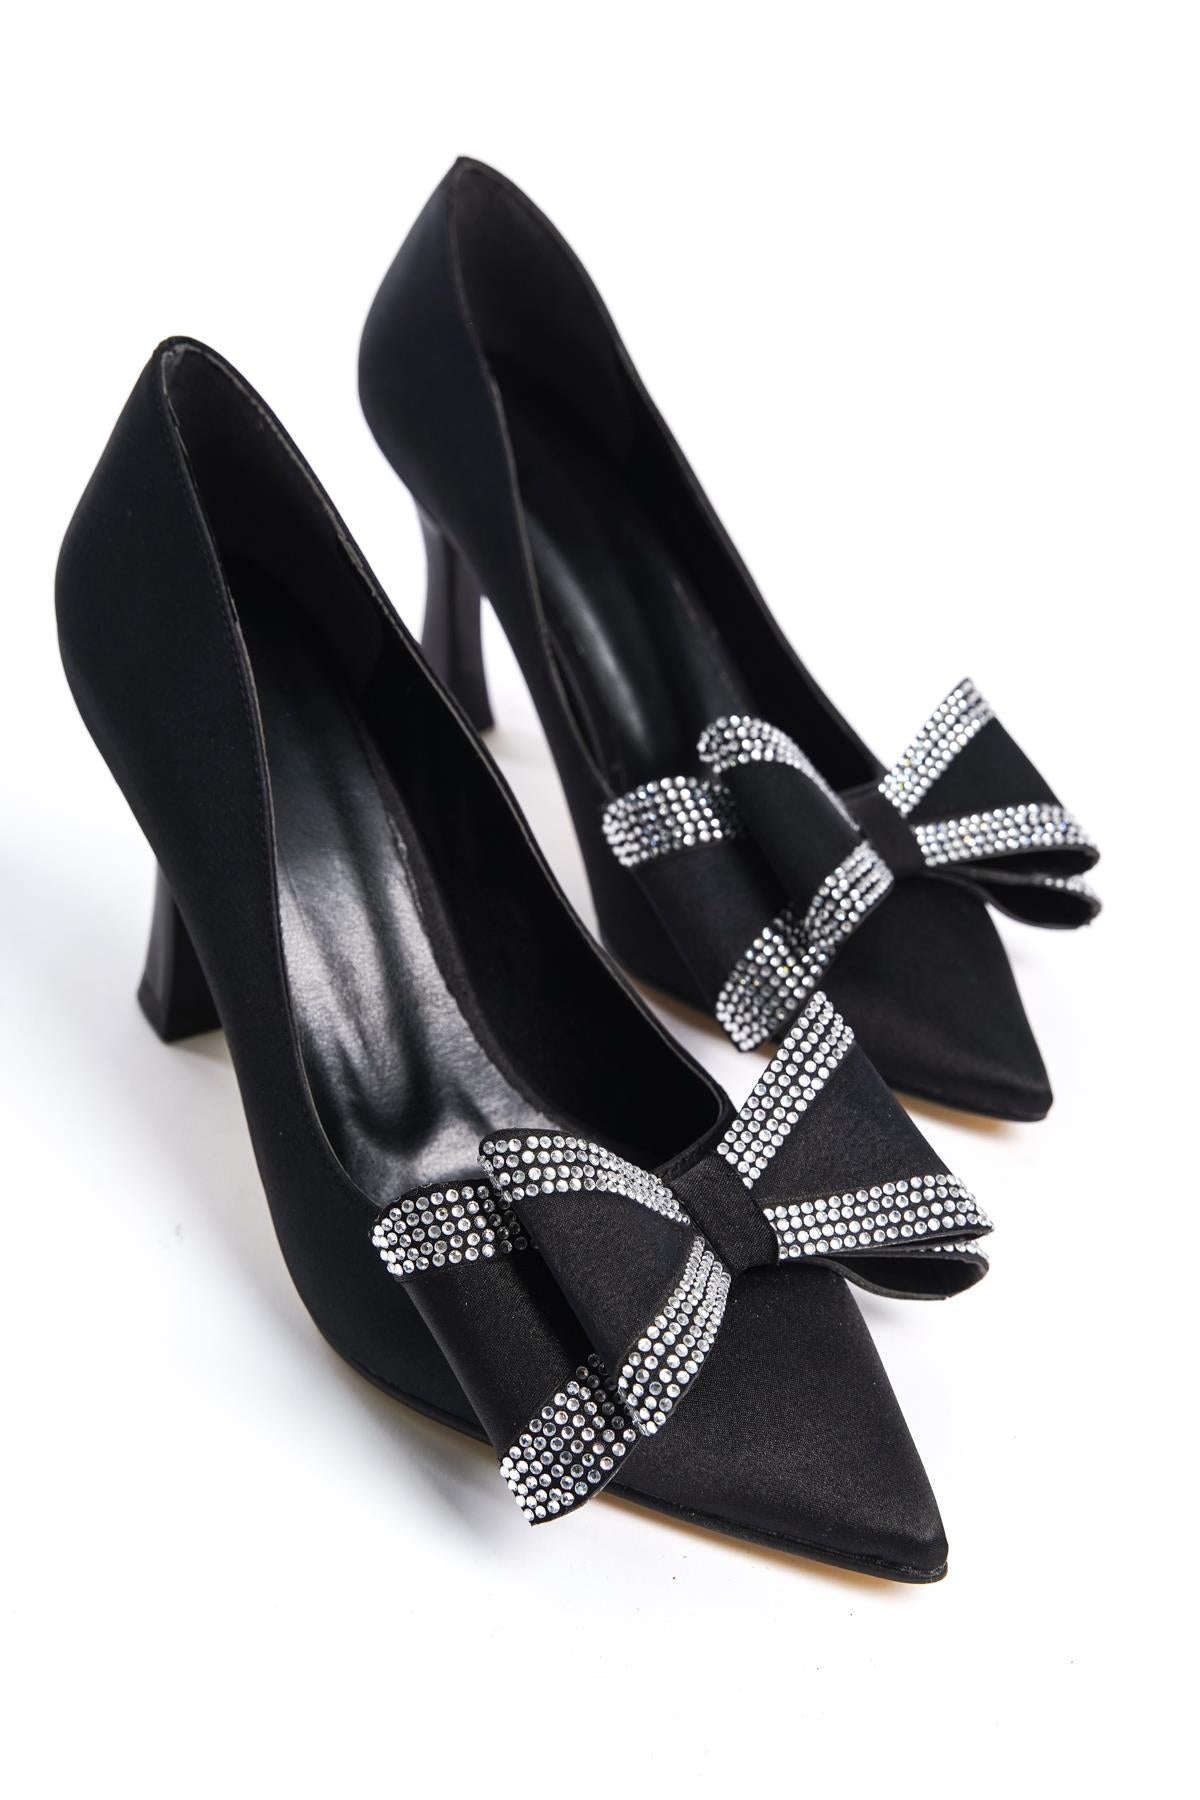 Women's Black Fasm Satin Painted Heel Bow Detailed Evening Shoes - STREETMODE ™